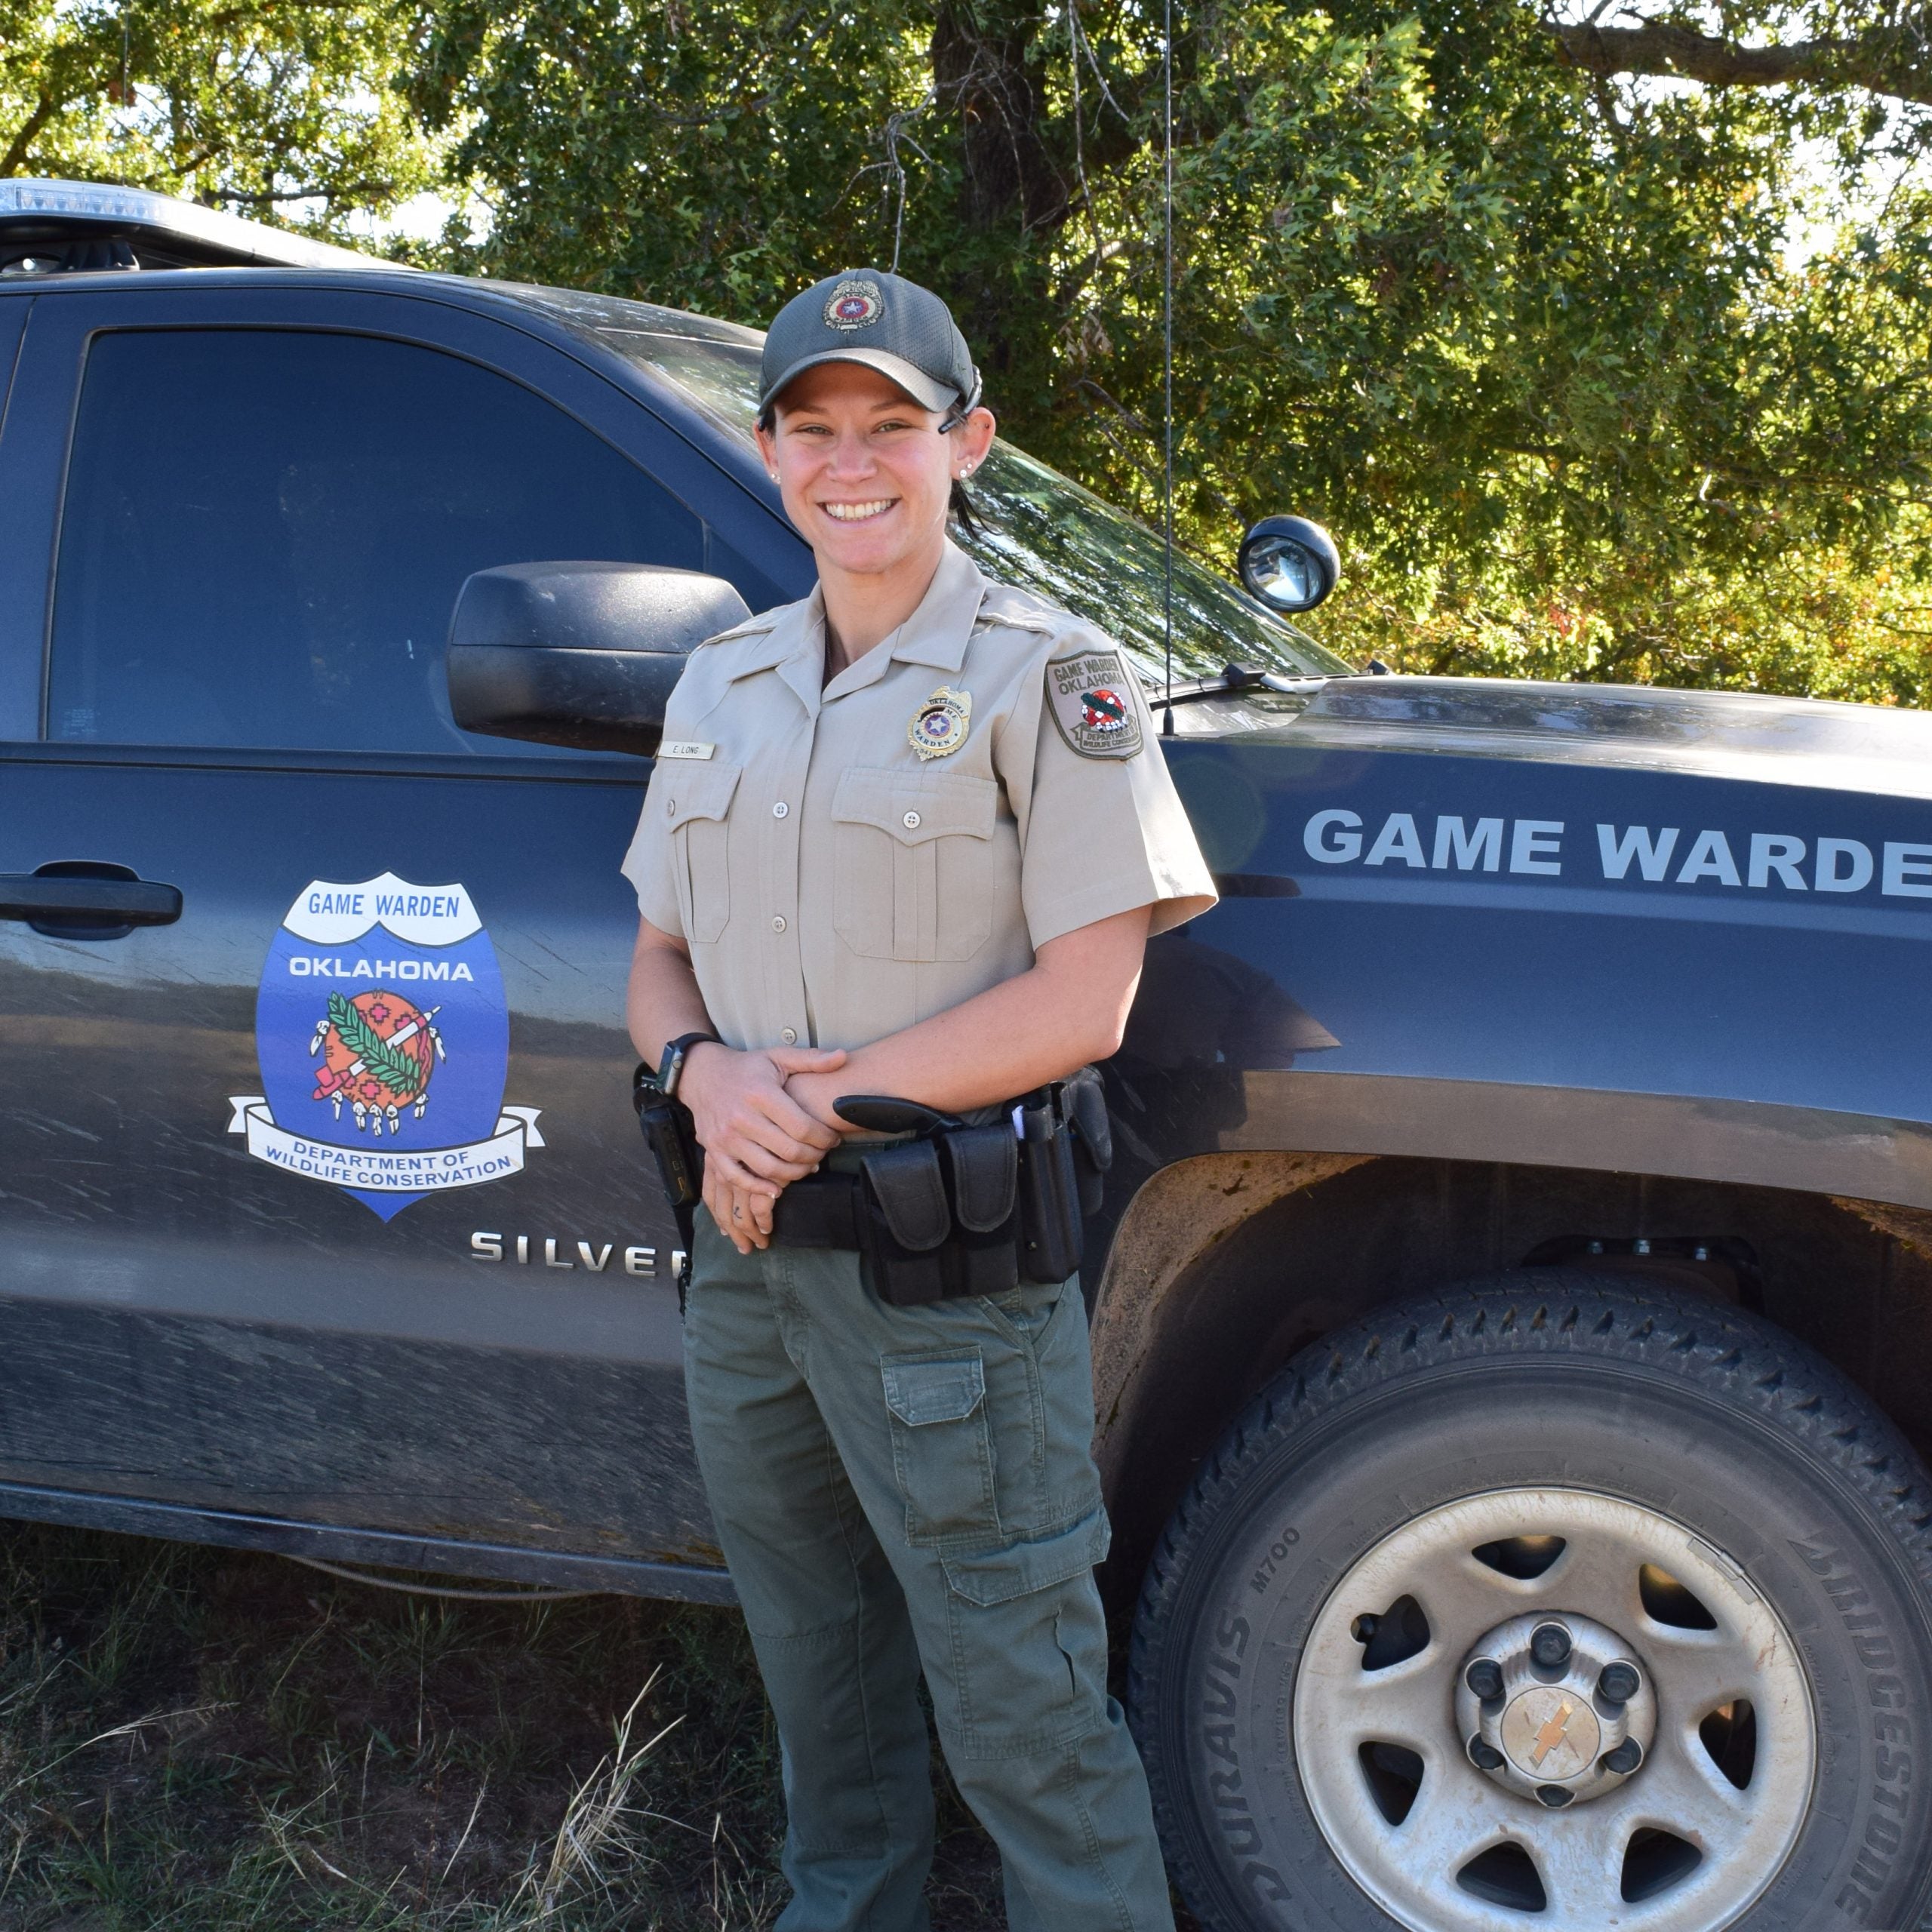 The Life of a Game Warden